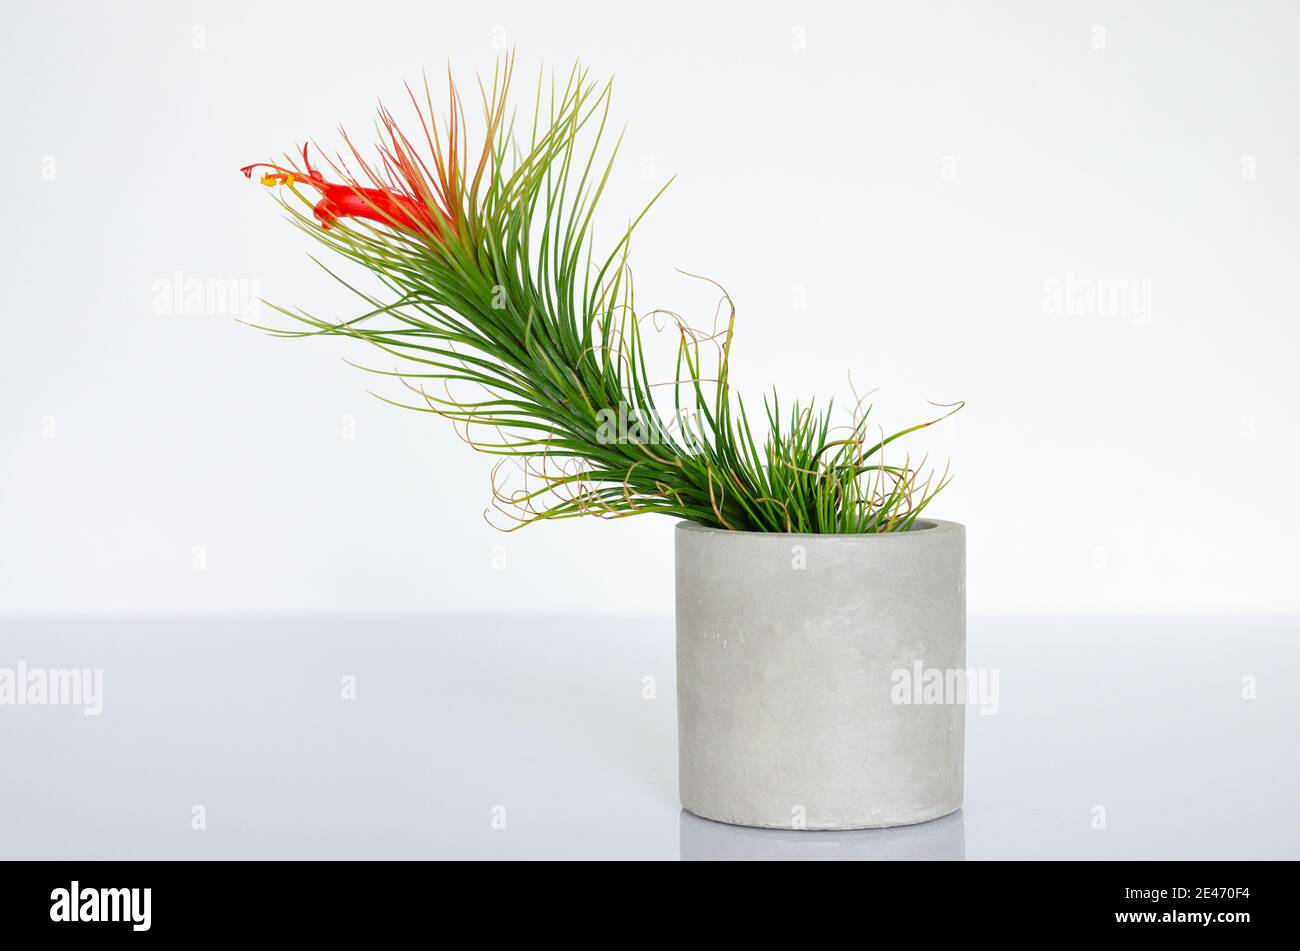 Air plant - Tillandsia funckiana with red color flower and pollen plants in cylinder pot. Stock Photo